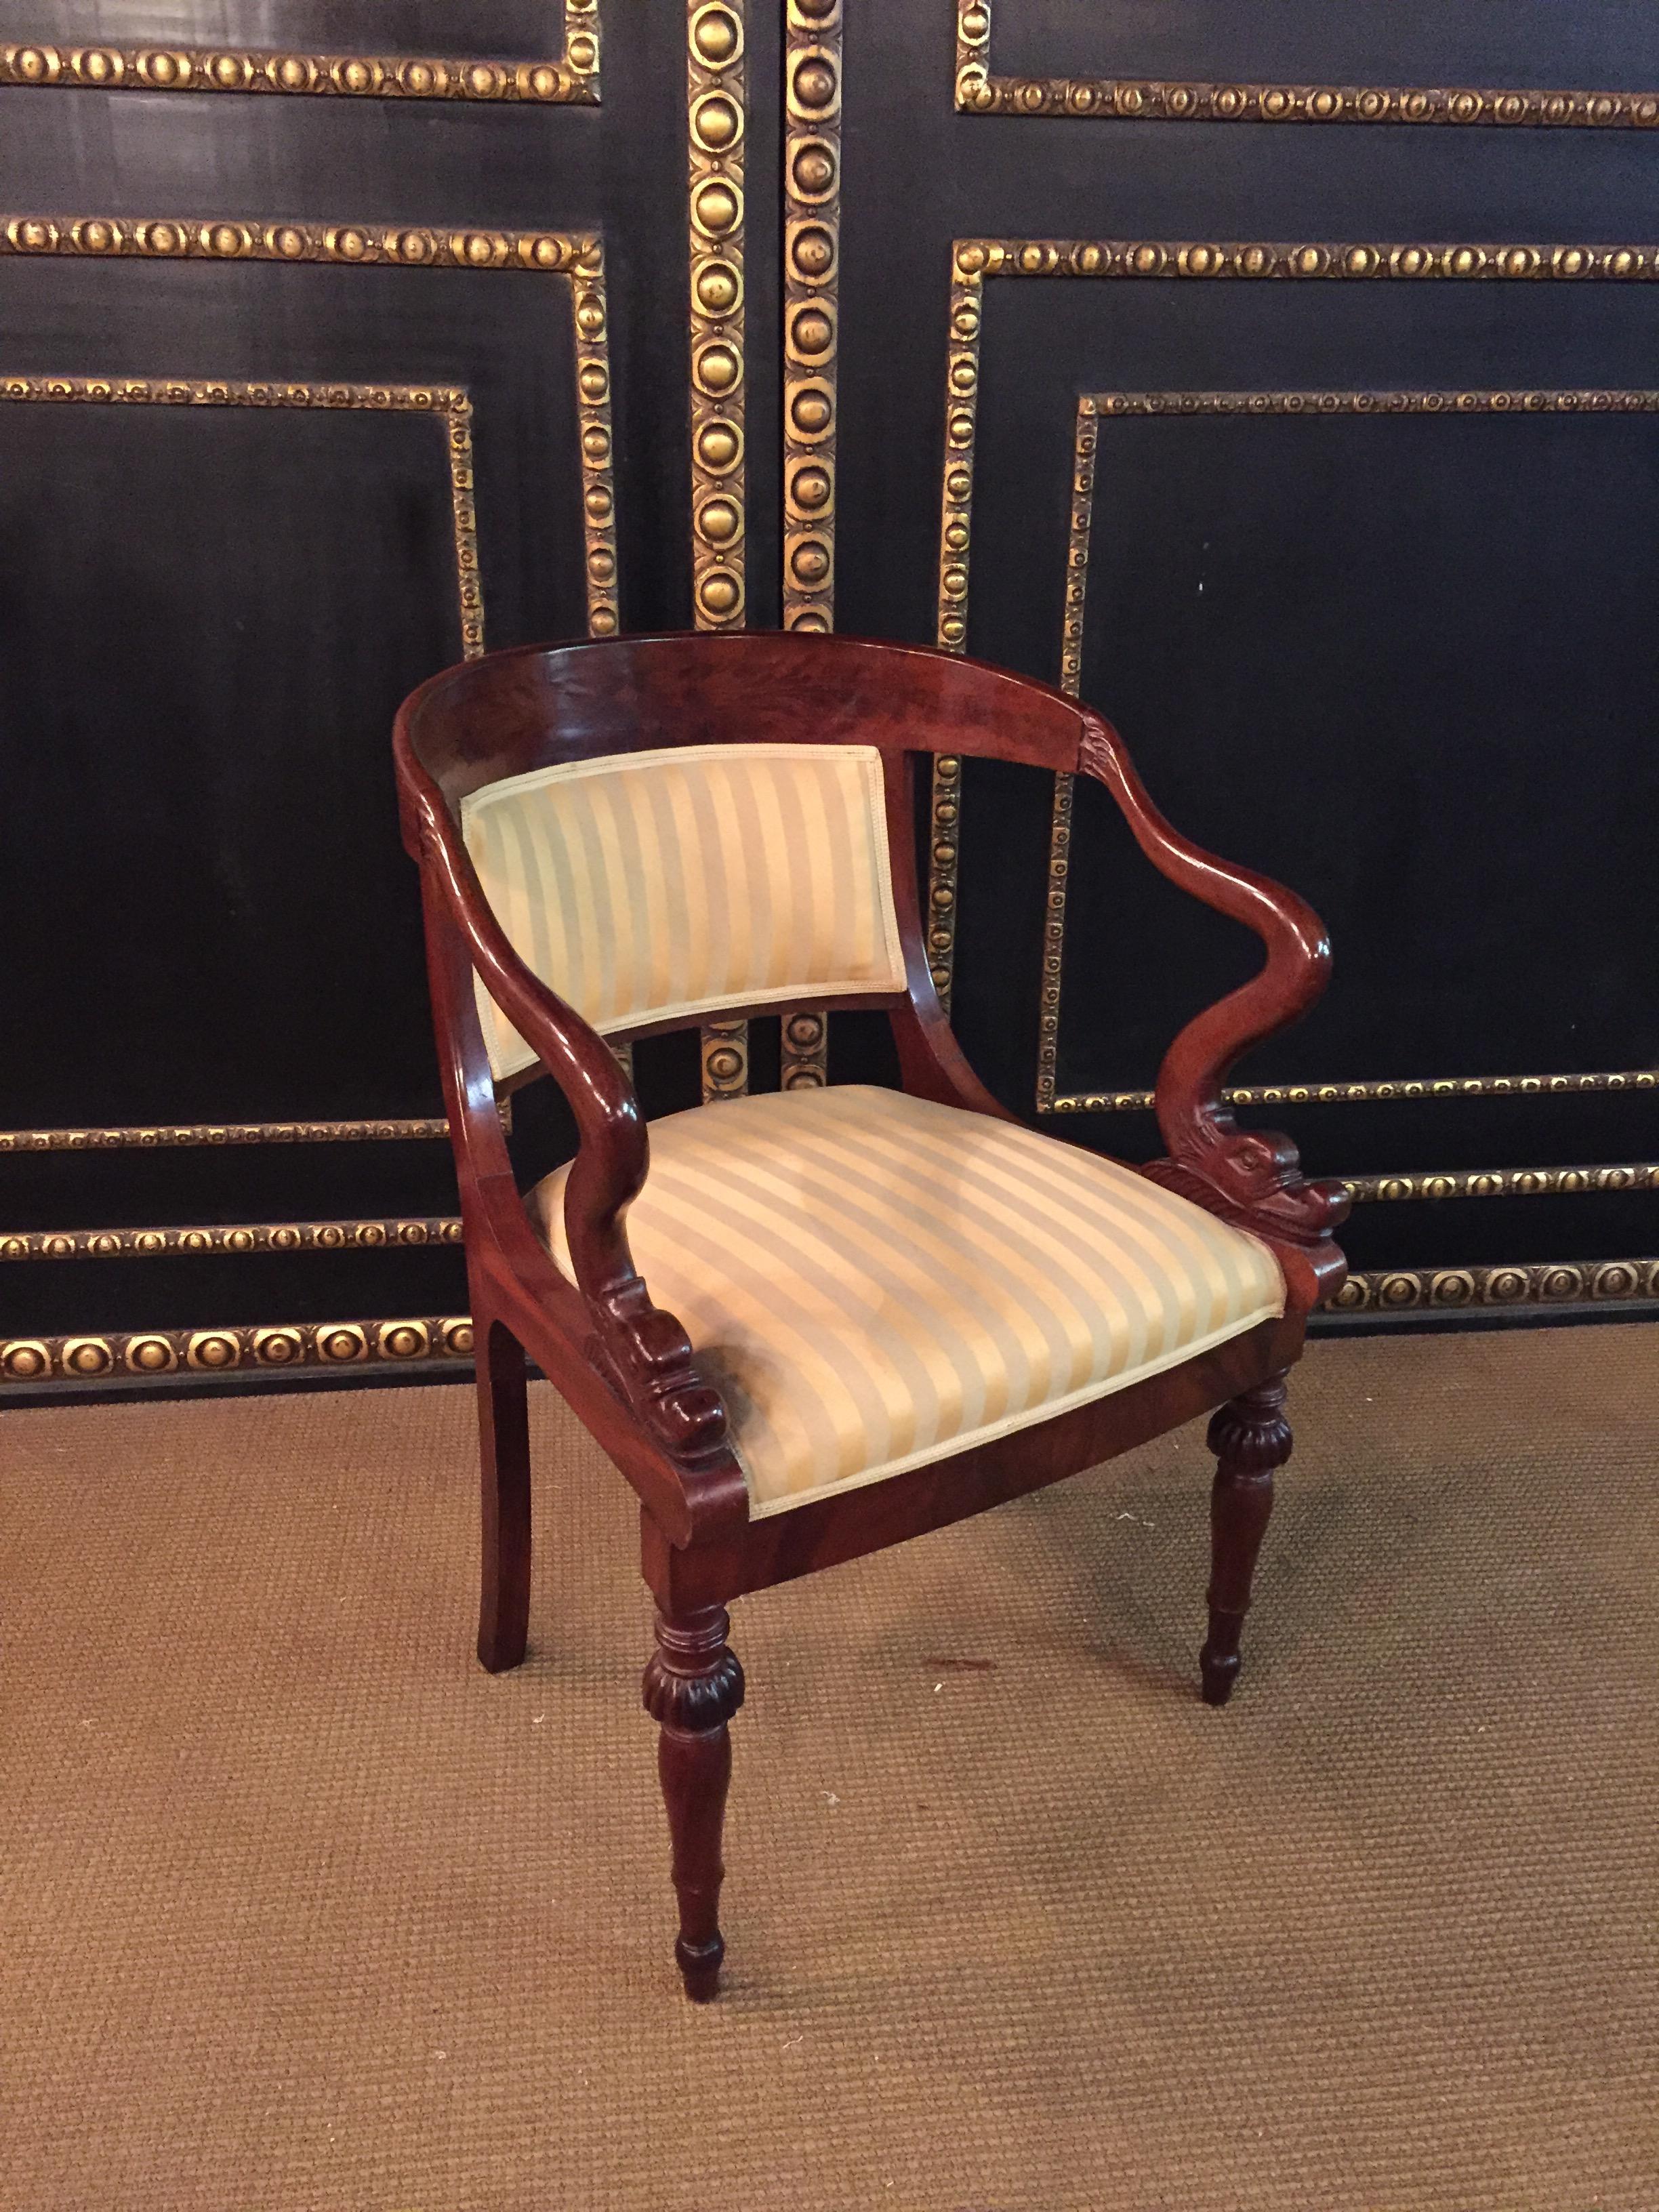 French Empire armchair, walnut, 1800-1810, shellac polish.
Armchair, massive mahogany, circa 1800-1810, restored condition, shellac polished, France,
Empire, new upholstery fabric.
The arms curved and carved with a mythological dolphin’s head at